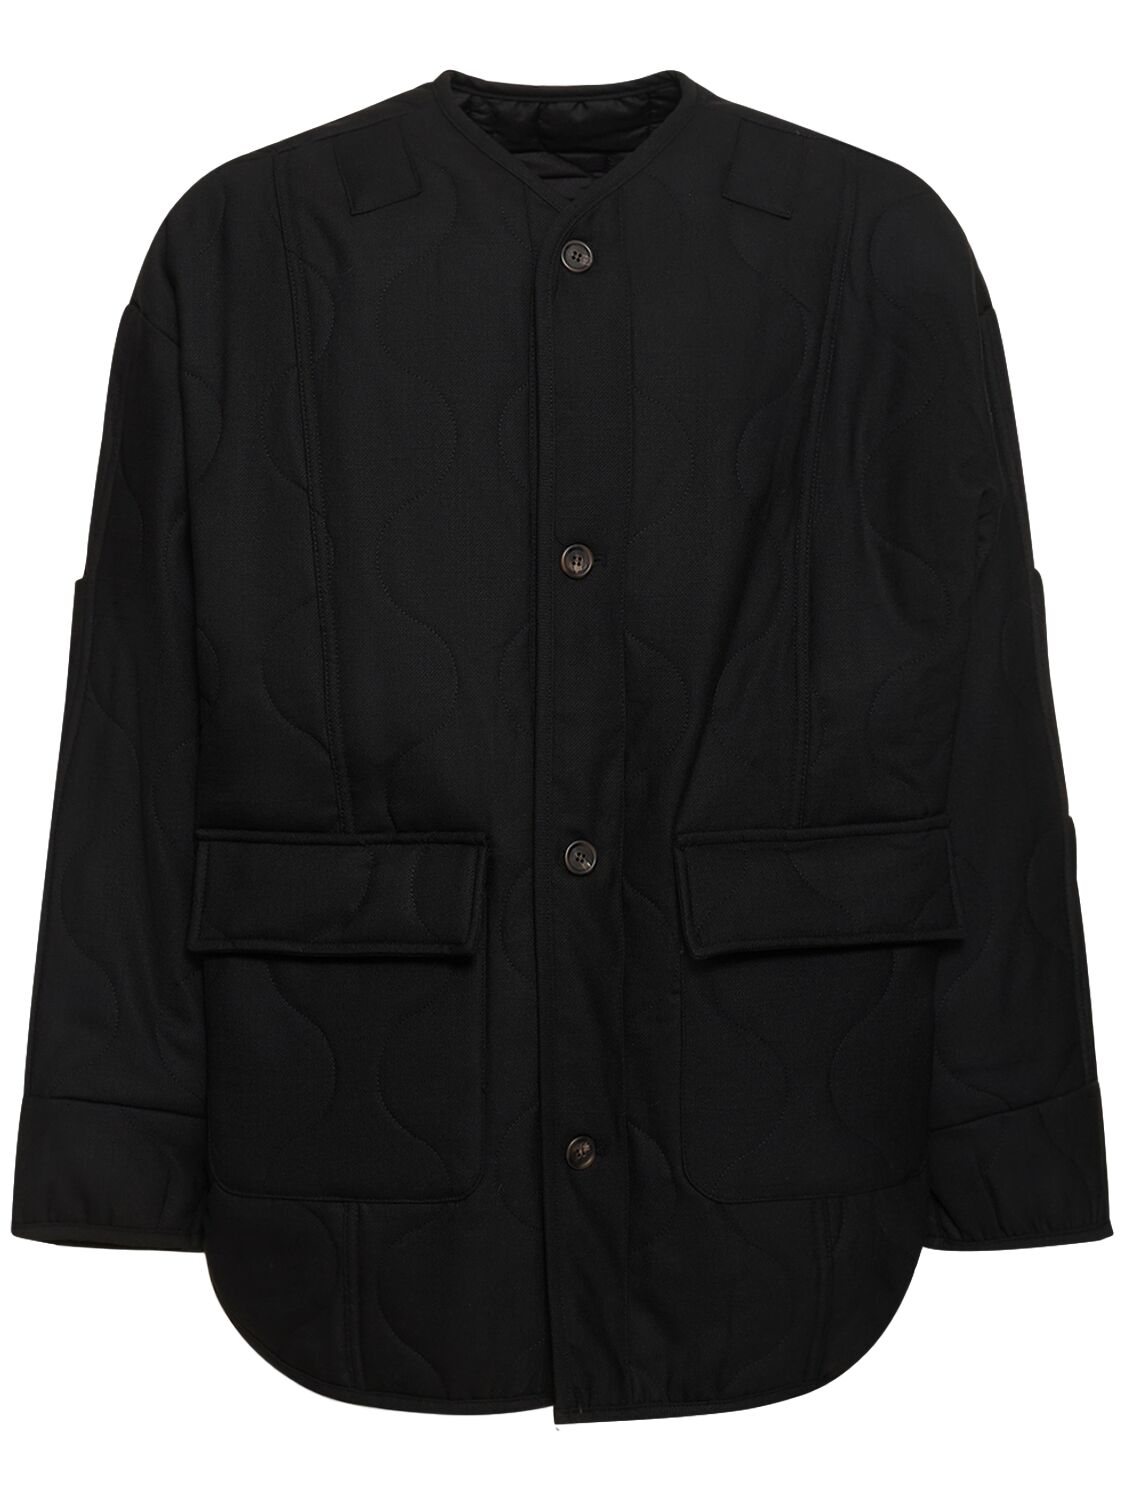 THE FRANKIE SHOP TED QUILTED WOOL BLEND JACKET